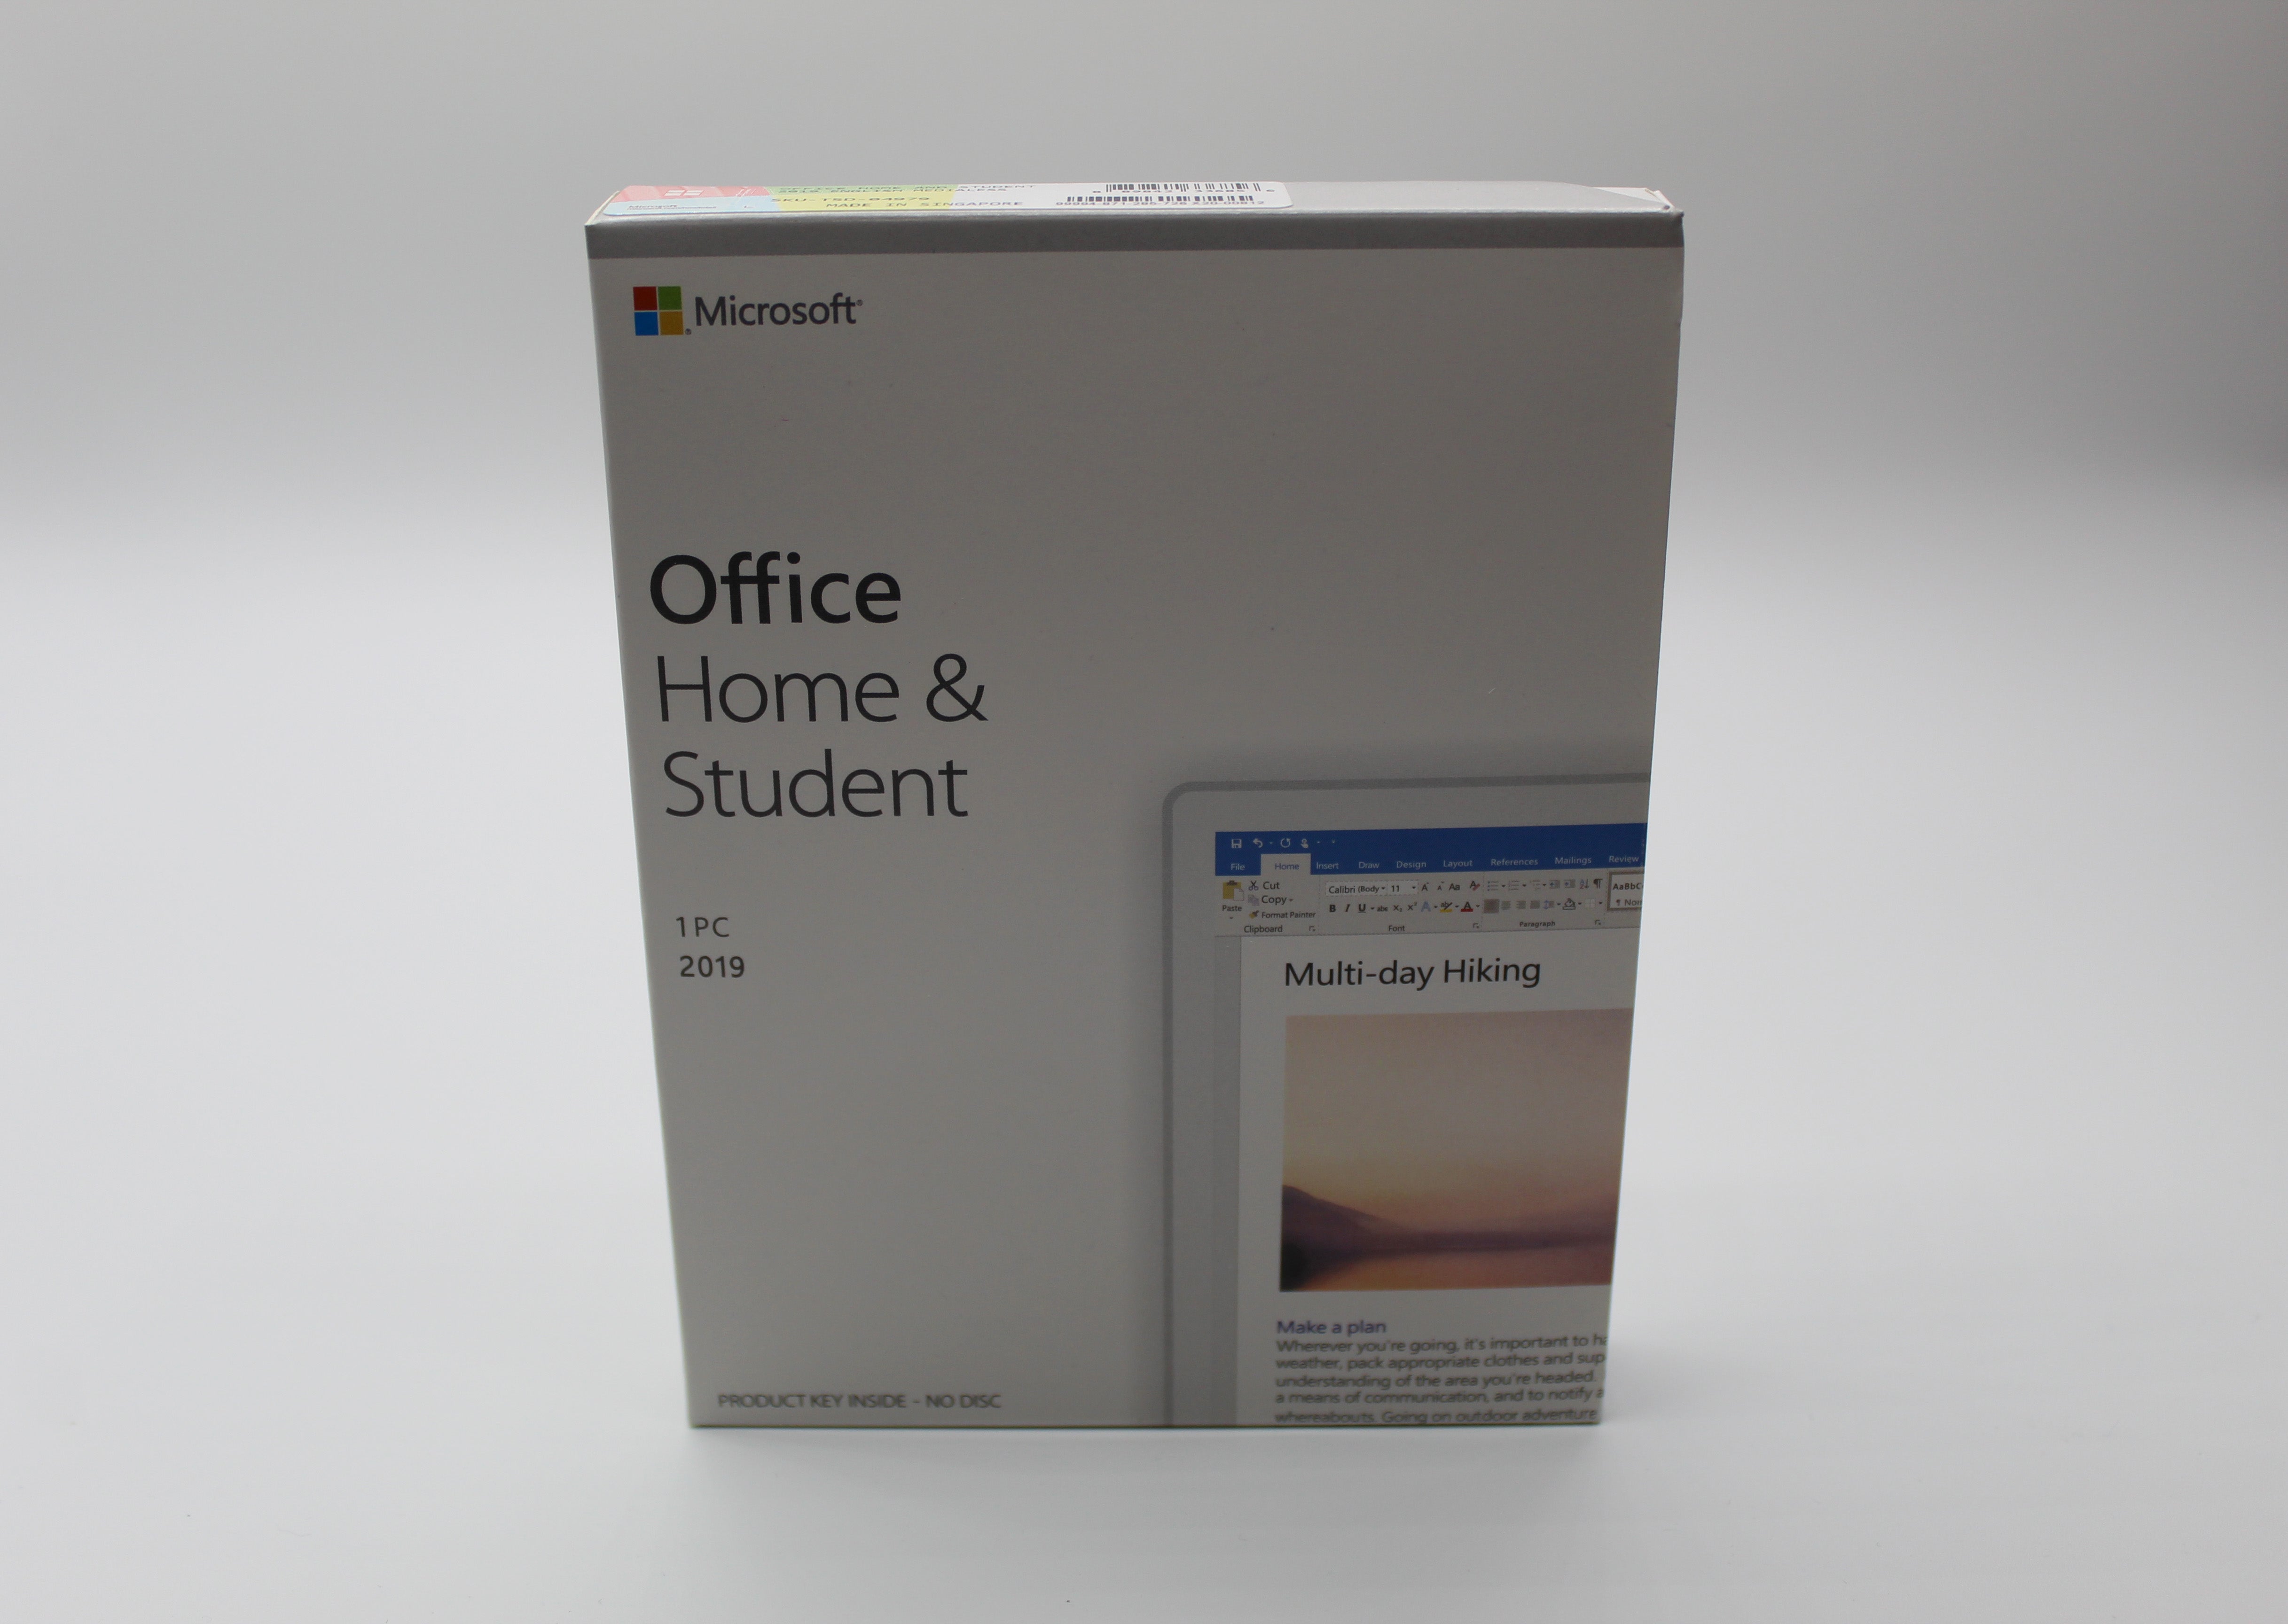 Microsoft Home & Student 2019 for Windows 10 - Retail Box with key card